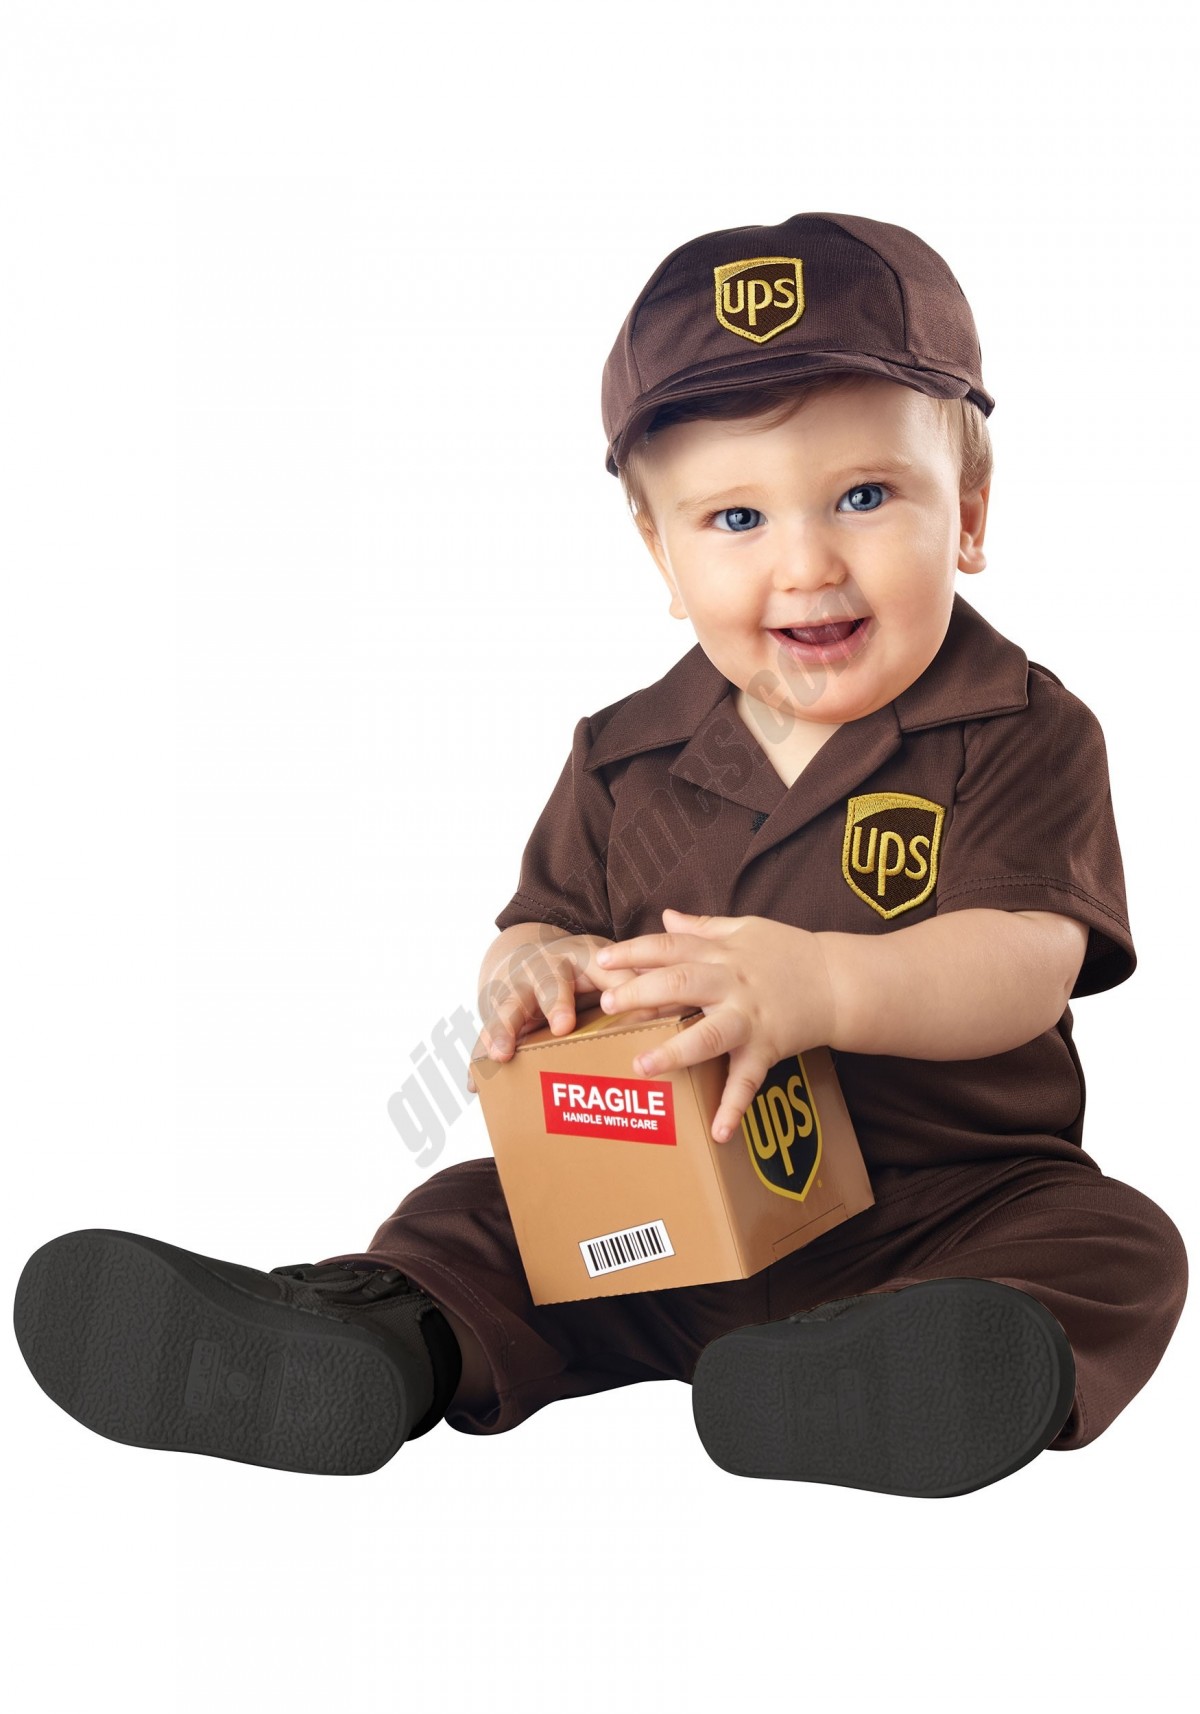 UPS Baby Costume Promotions - -0